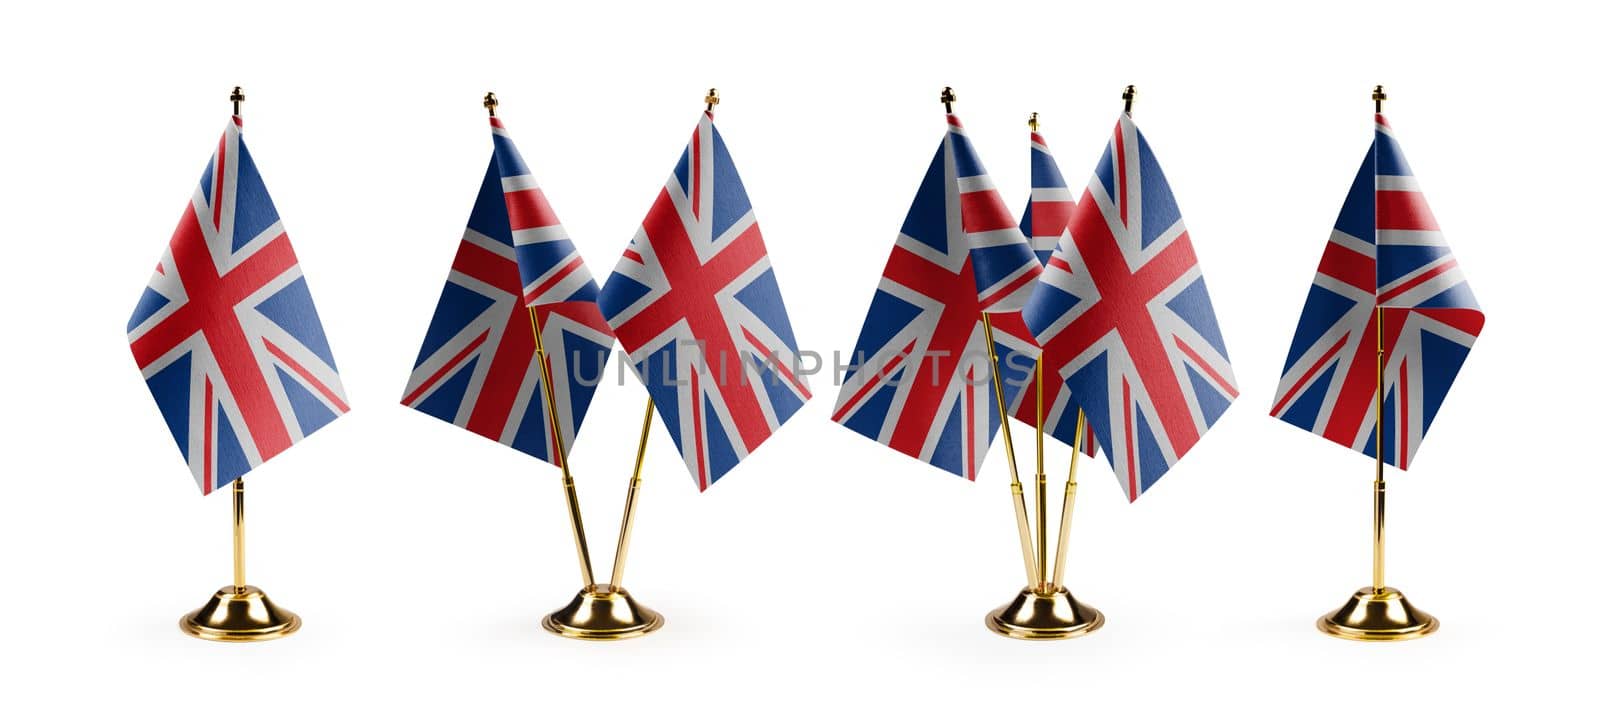 Small national flags of the United Kingdom on a white background.